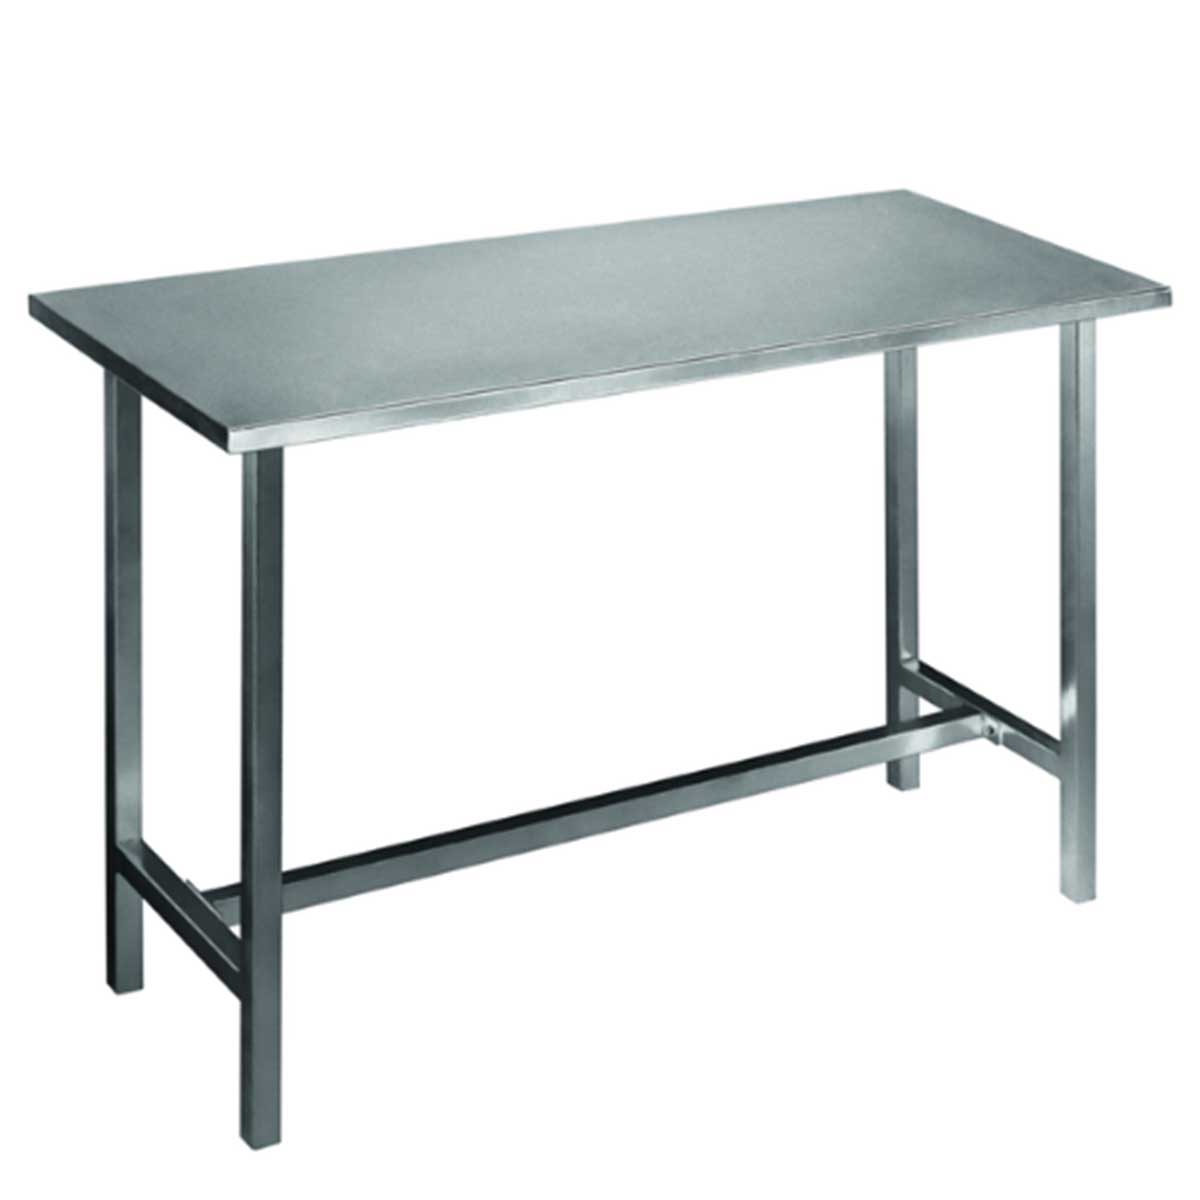 Metal Office Table Manufacturers, Suppliers in South Extension Part 2